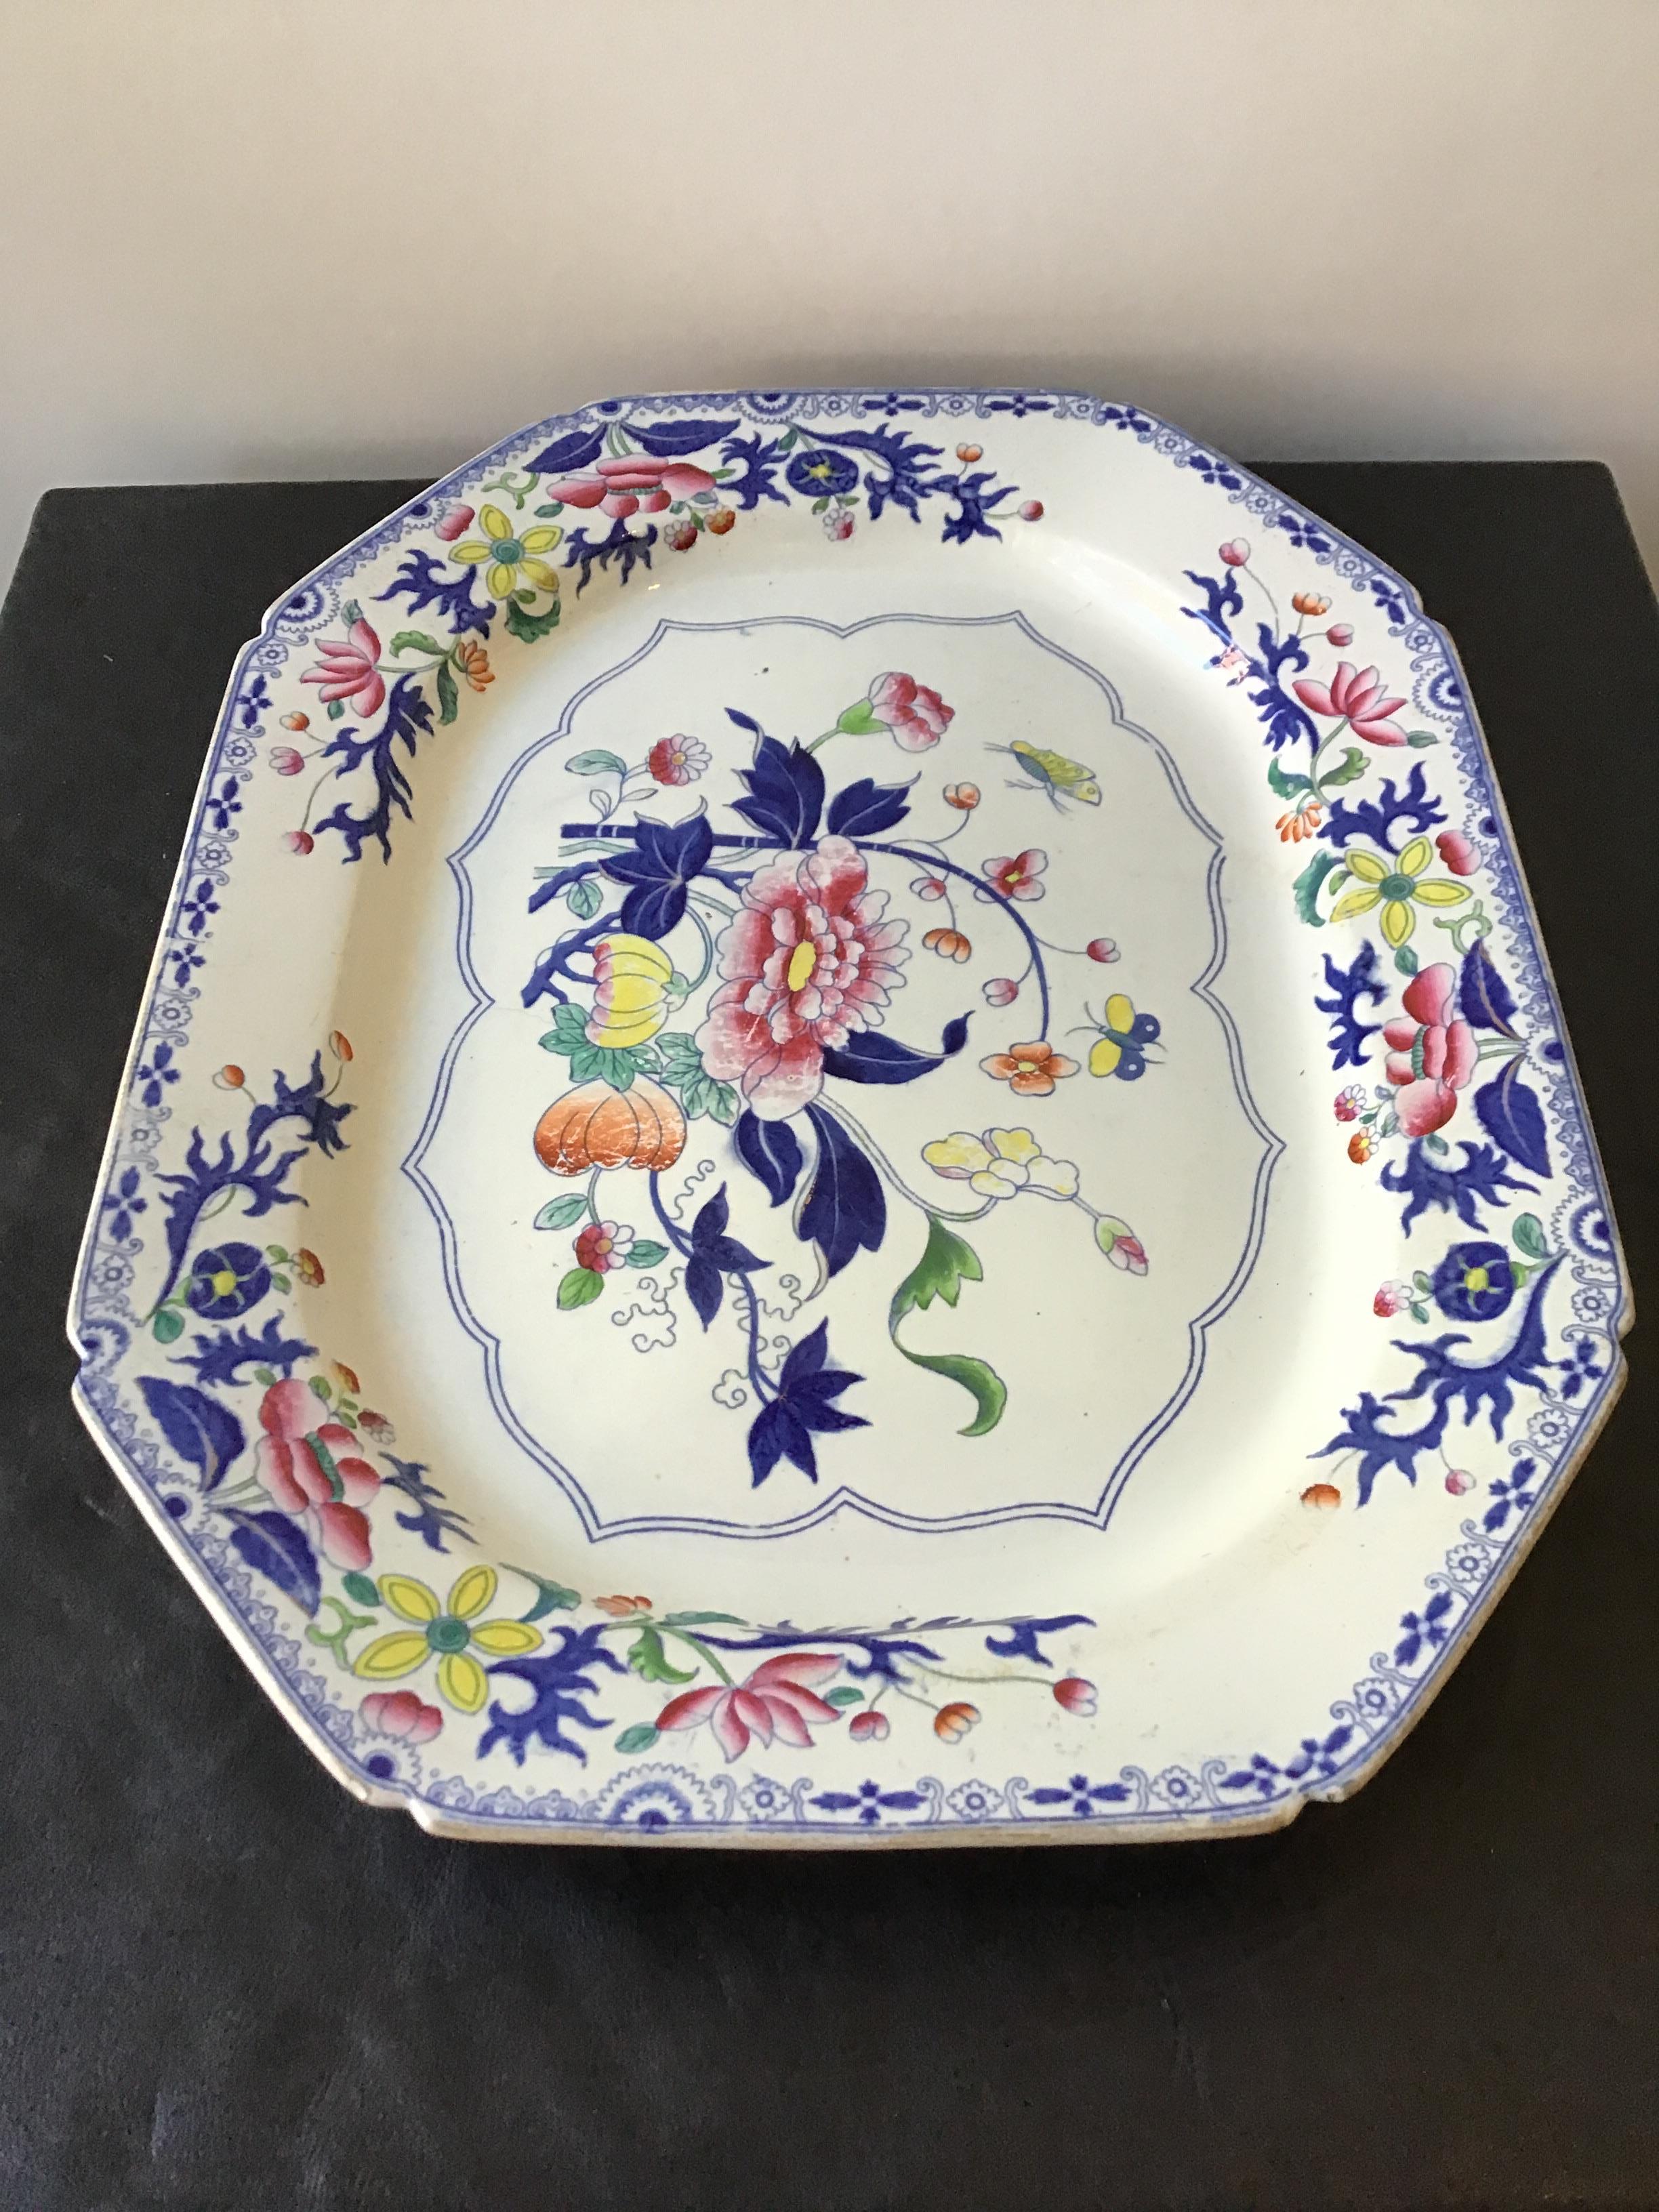 1880s Stone China Platter In Good Condition For Sale In Tarrytown, NY